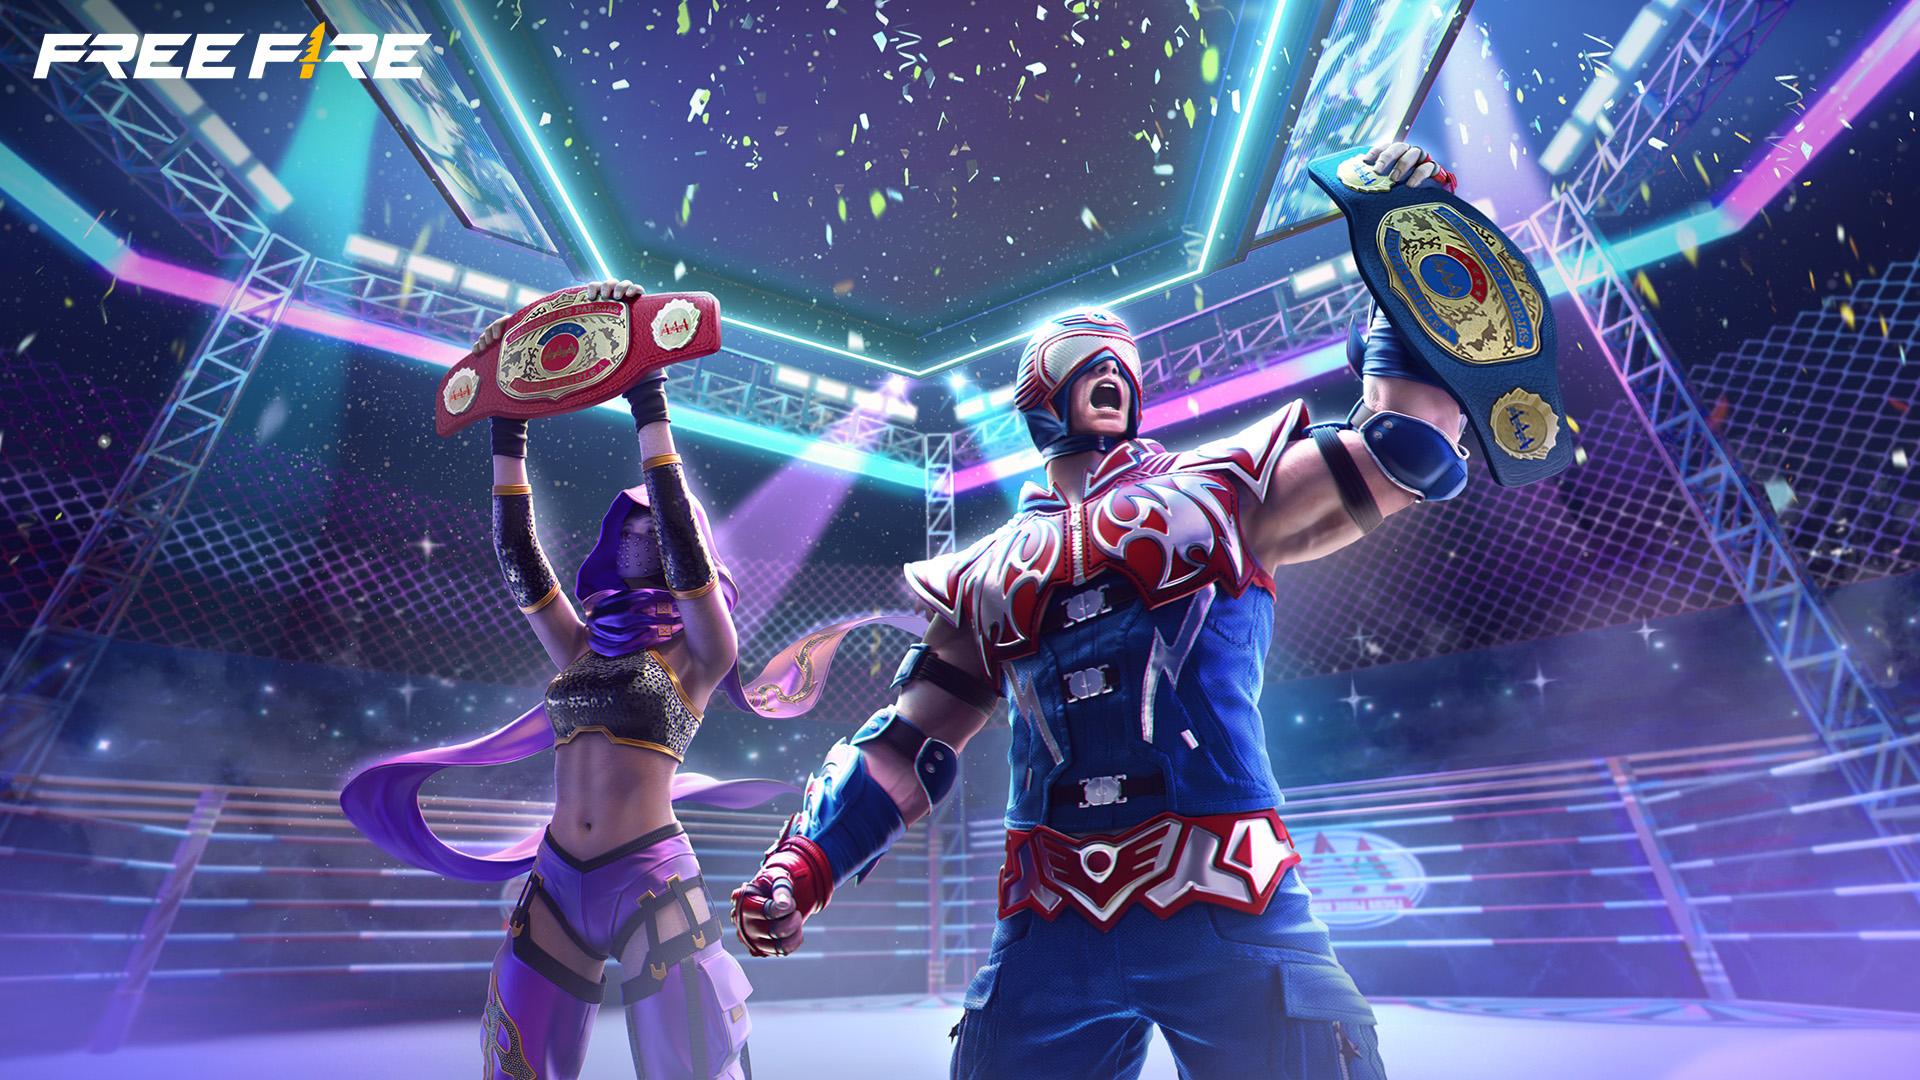 Garena Free Fire Redeem Codes of September 28: Get free diamonds, gun skins, and more rewards from the latest ACTIVE codes. How to redeem them successfully